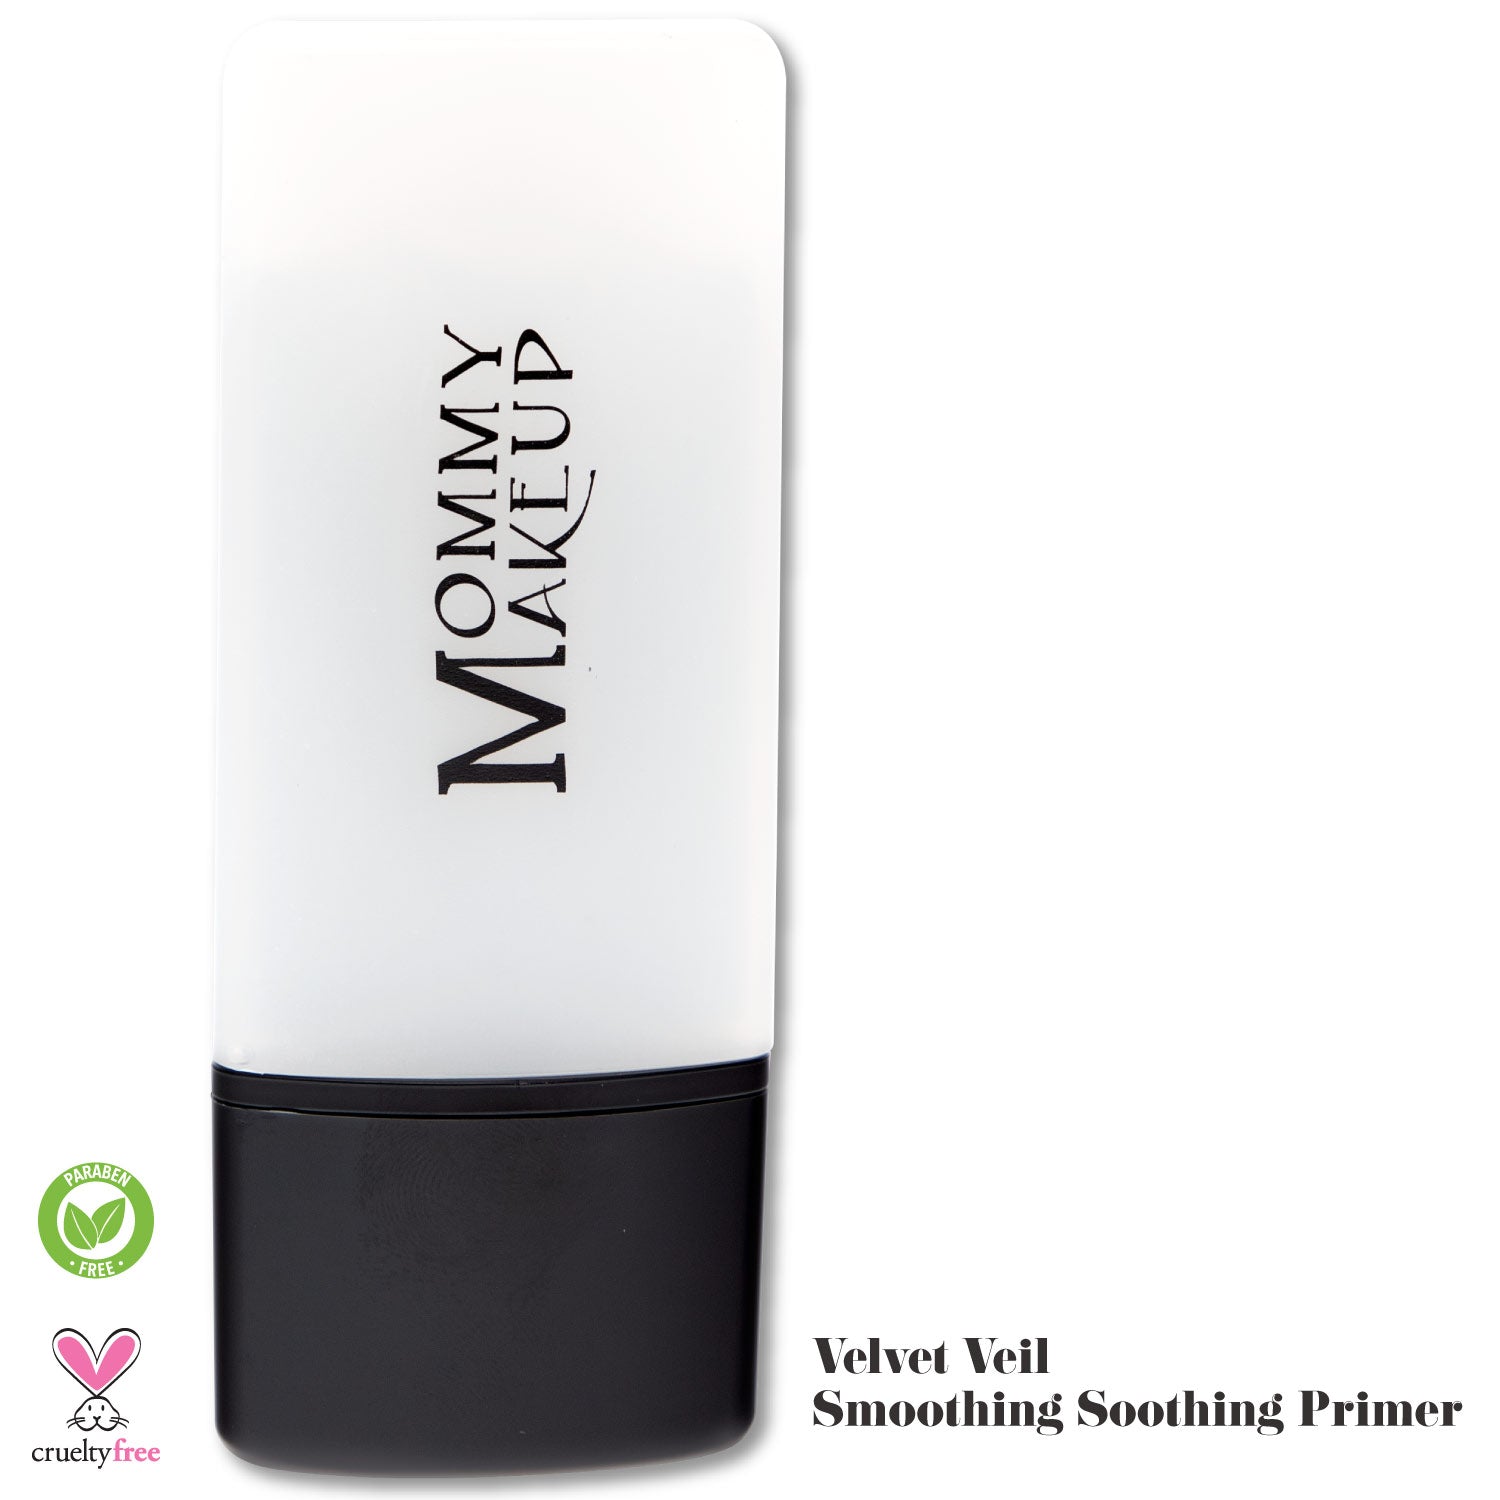 Velvet Veil Smoothing Soothing Primer - This lightweight, conditioning primer works beautifully to prime and prepare your skin for makeup while filling in fine lines and pores.